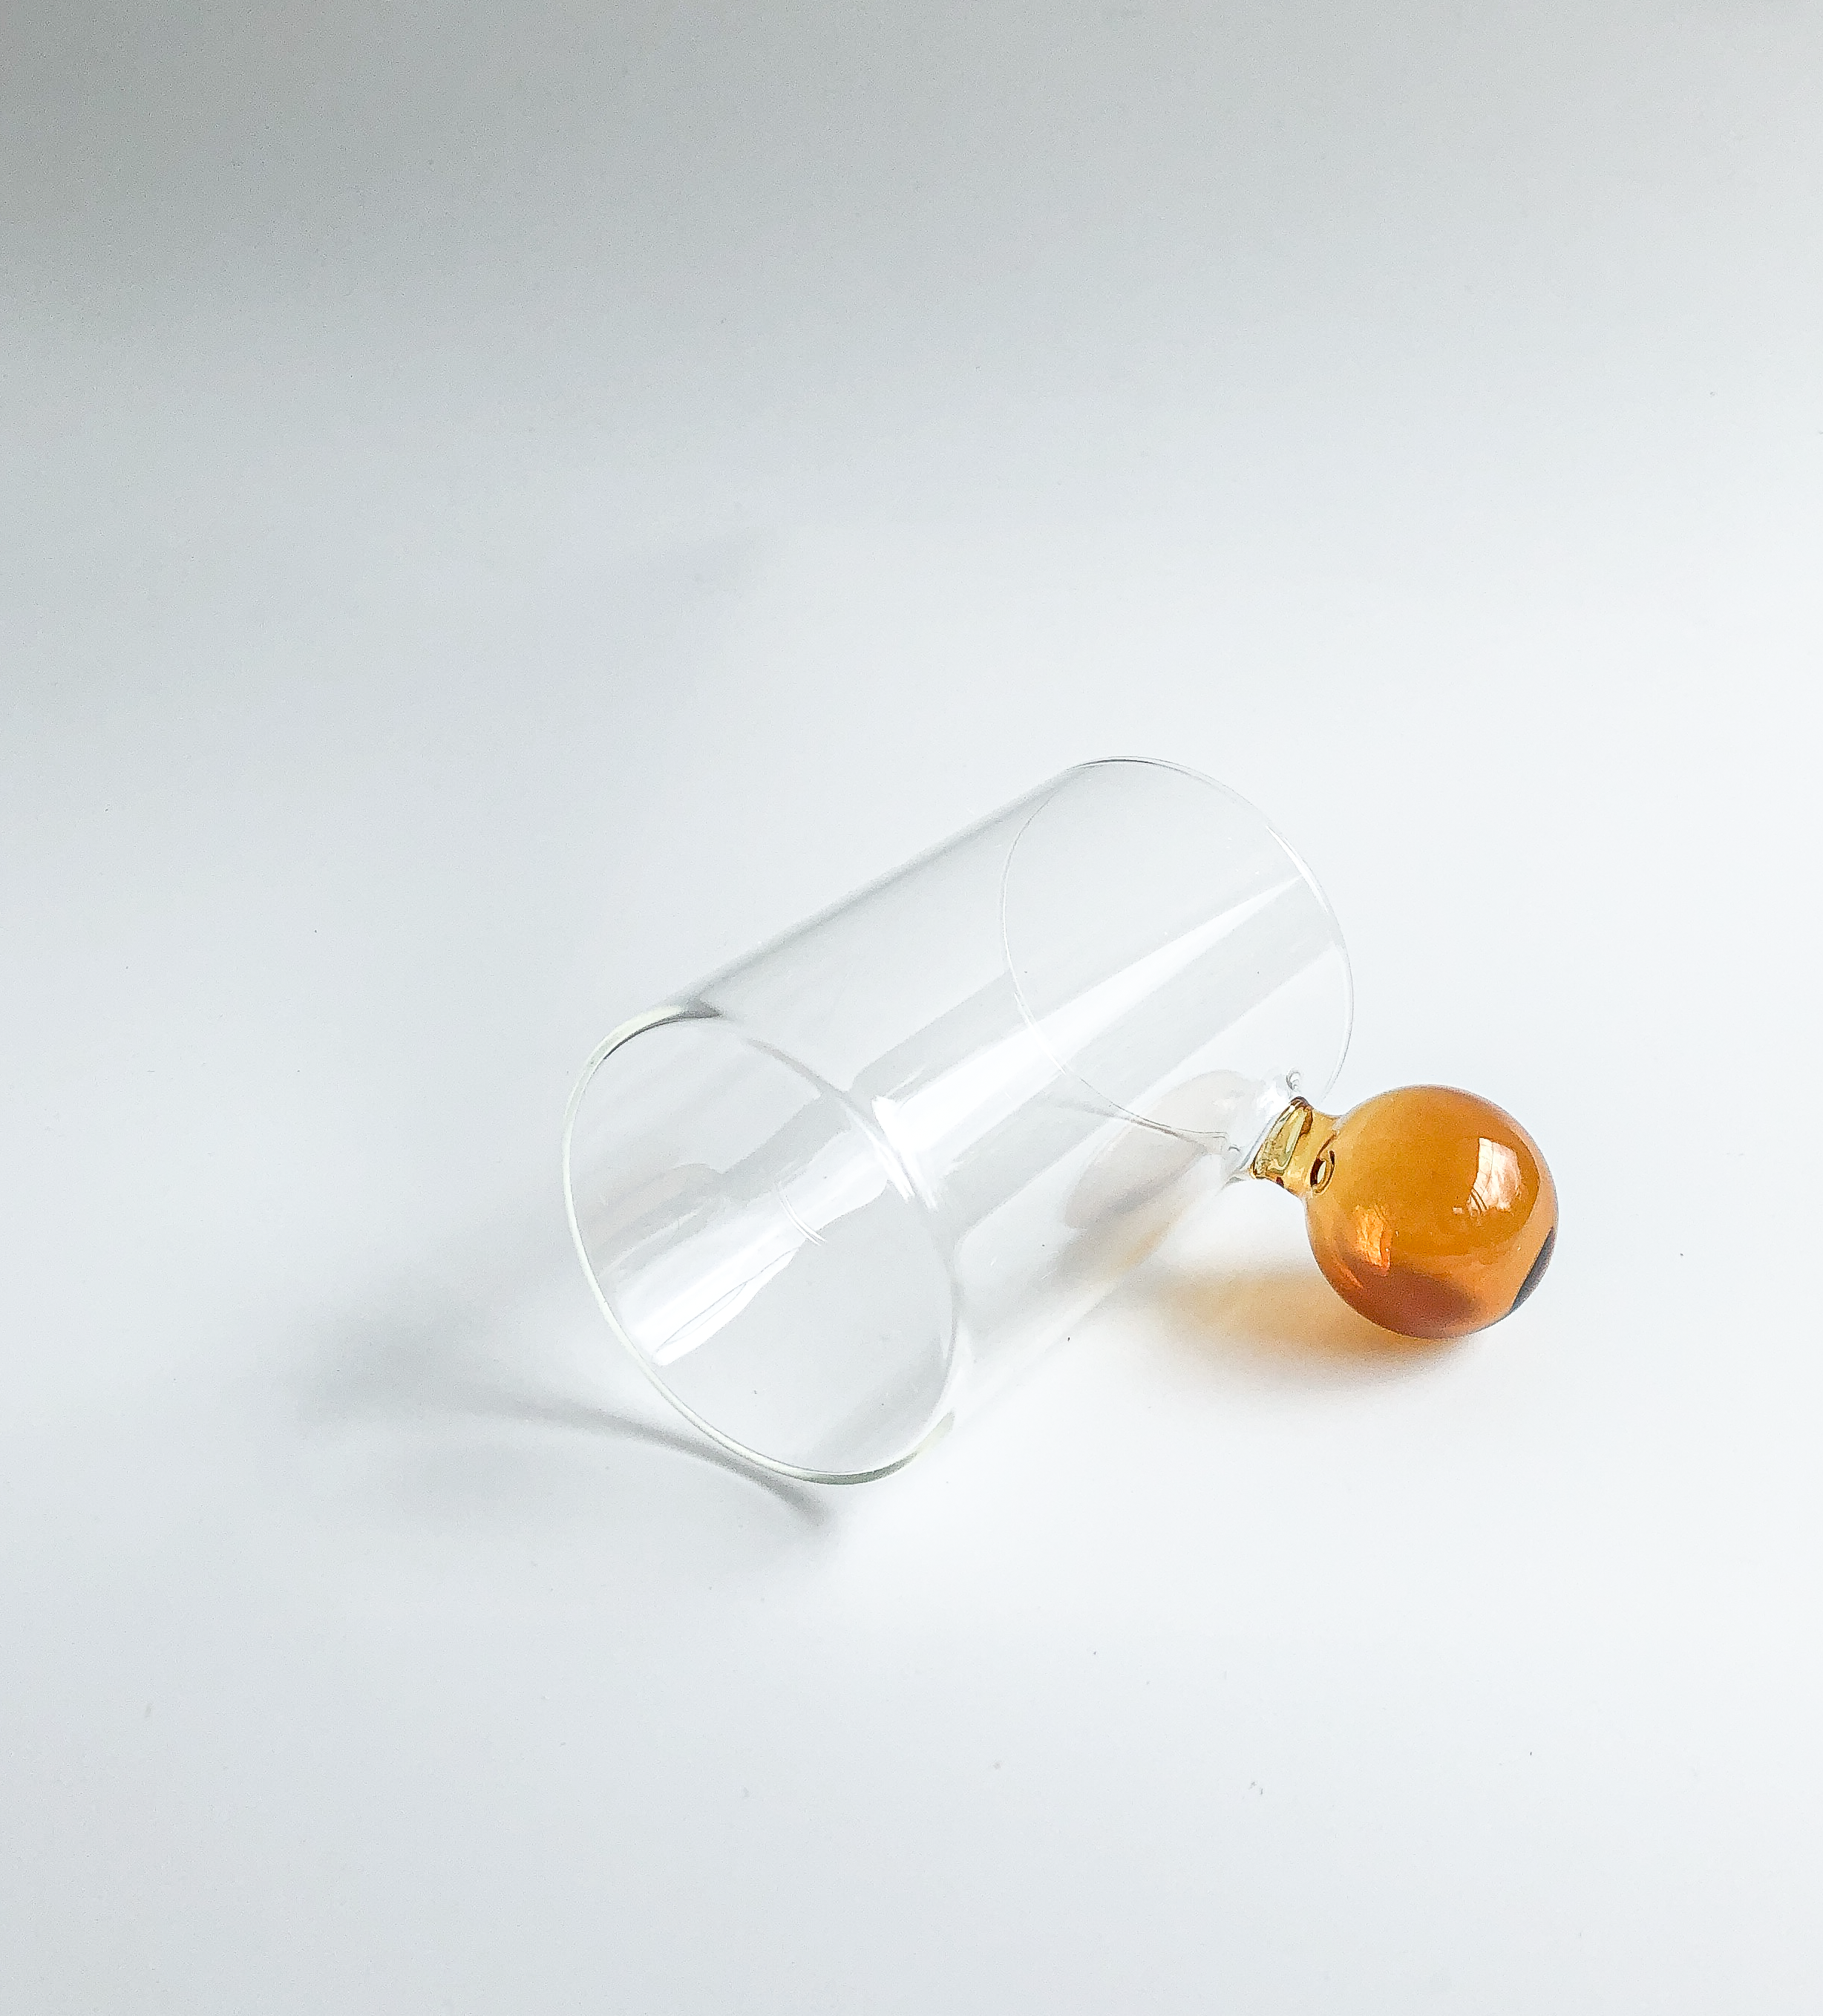 Bubble Coaster Mug in Amber by PROSE Tabletop